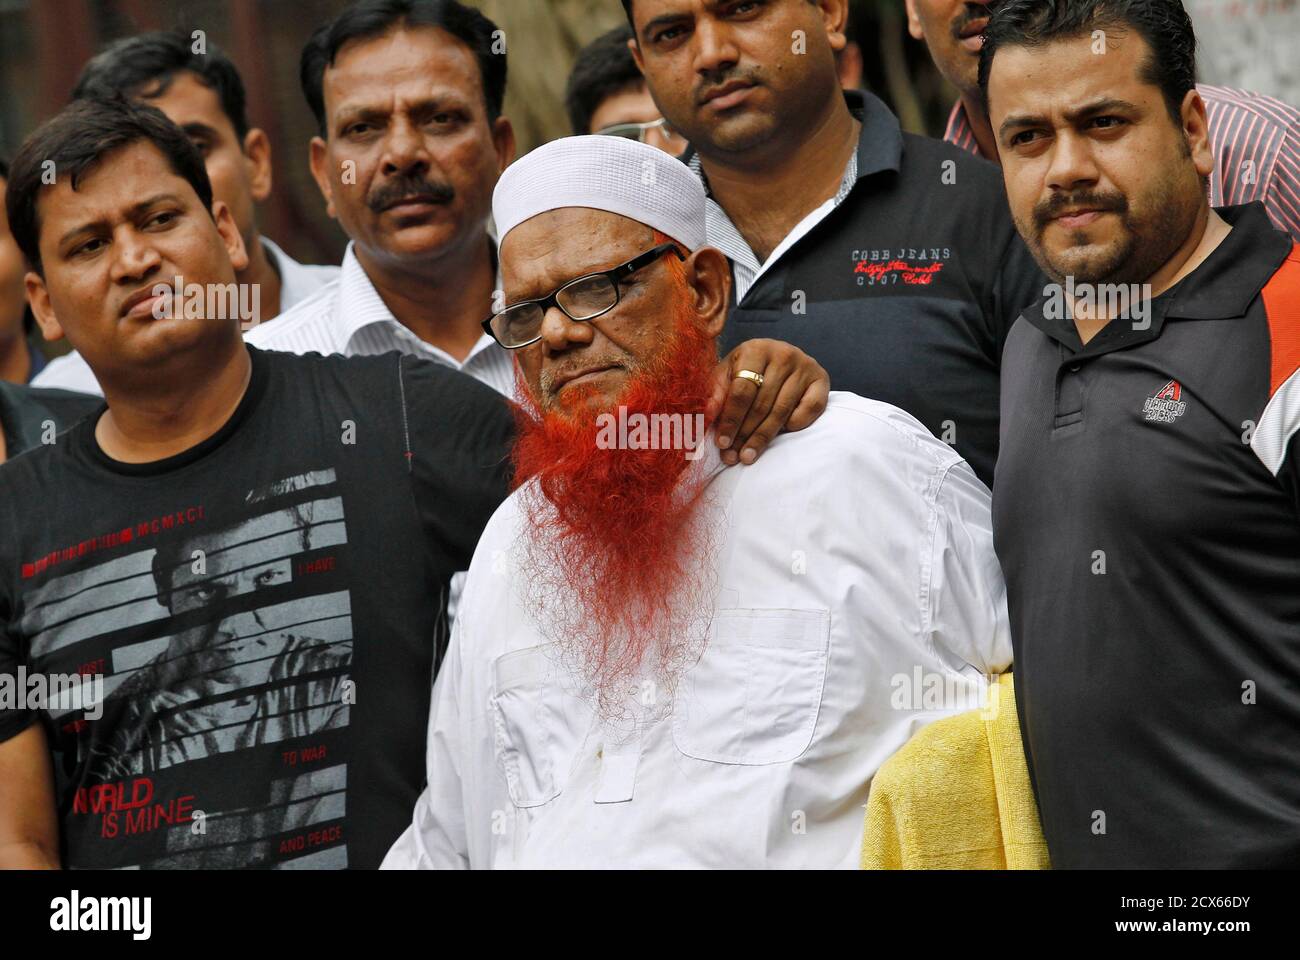 Plainclothes policemen present Syed Abdul Karim (C) to the media after his  arrest, in New Delhi, August 17, 2013. Karim, who police say is an expert  bomb maker of the Lashkar-e-Taiba (LeT)